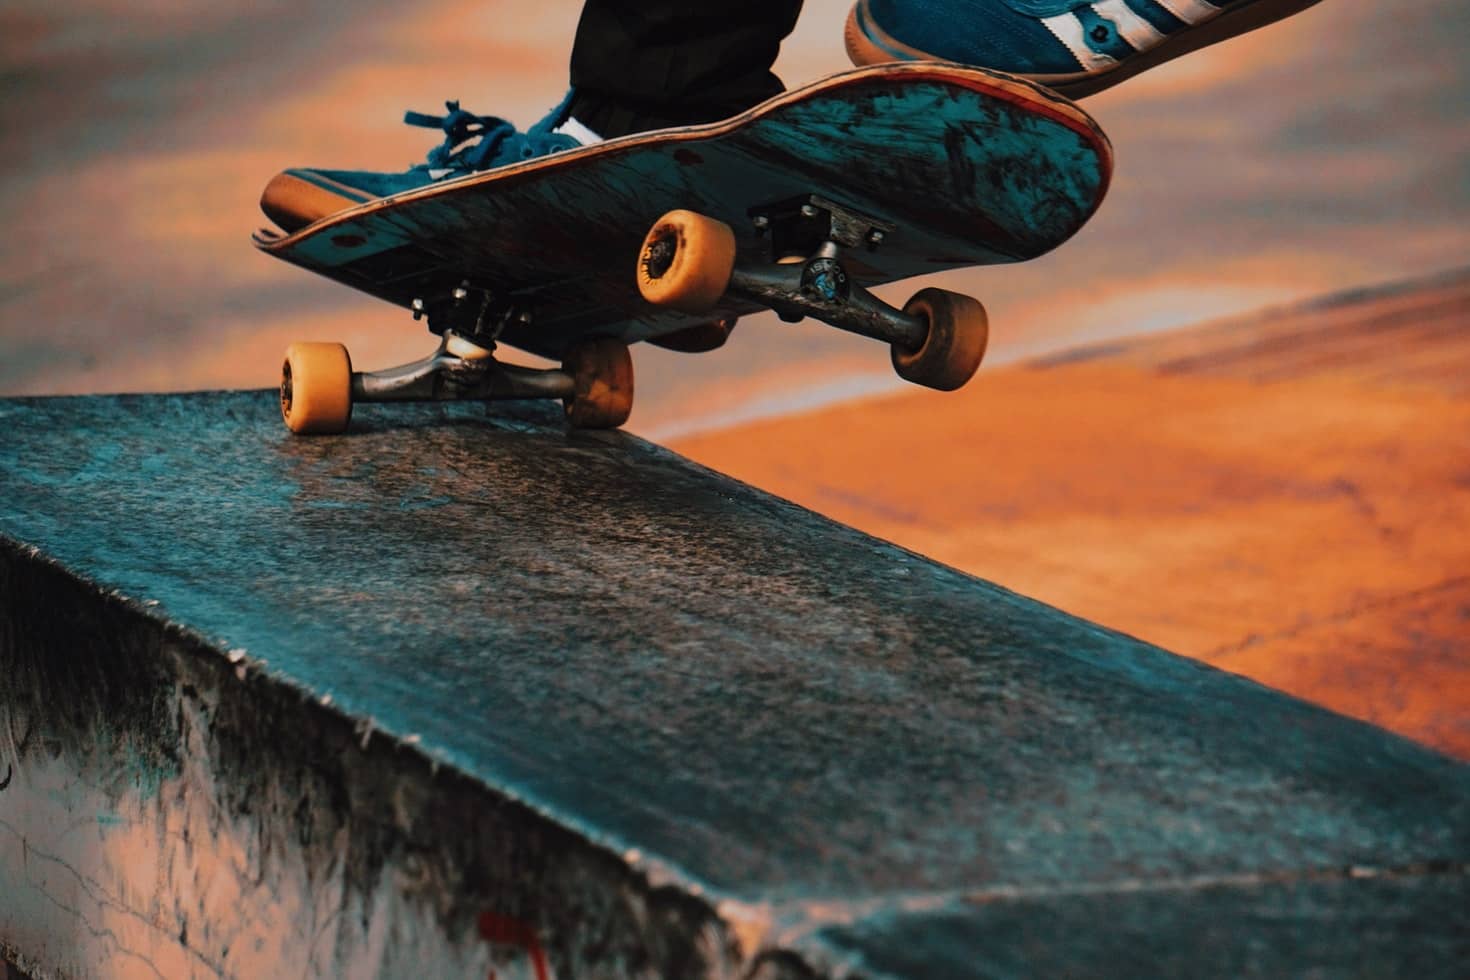 close up of a skateboarder